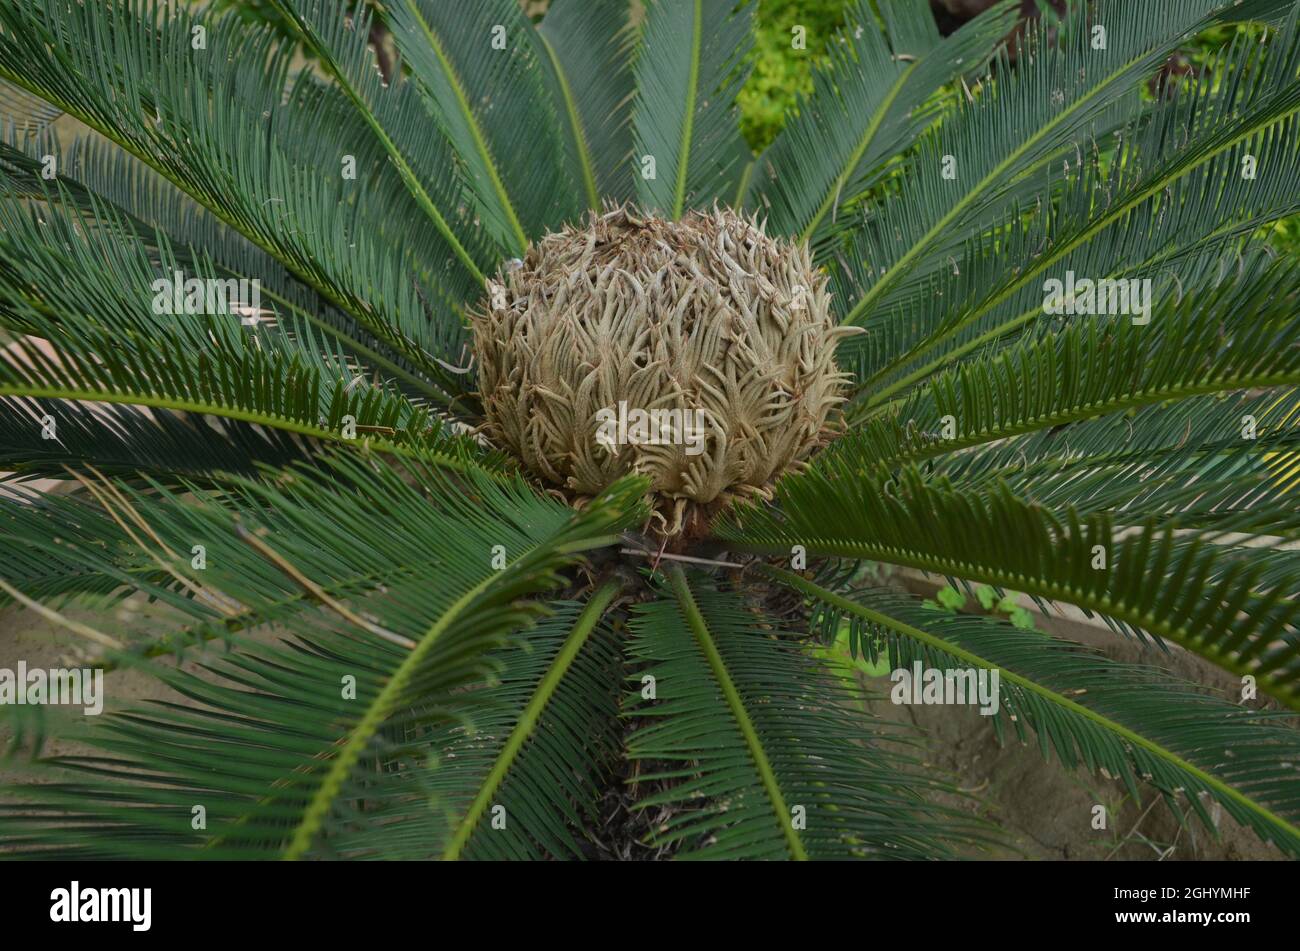 Cycas pectinata plant one of the most attrective plant. commomnly used in parks. Stock Photo